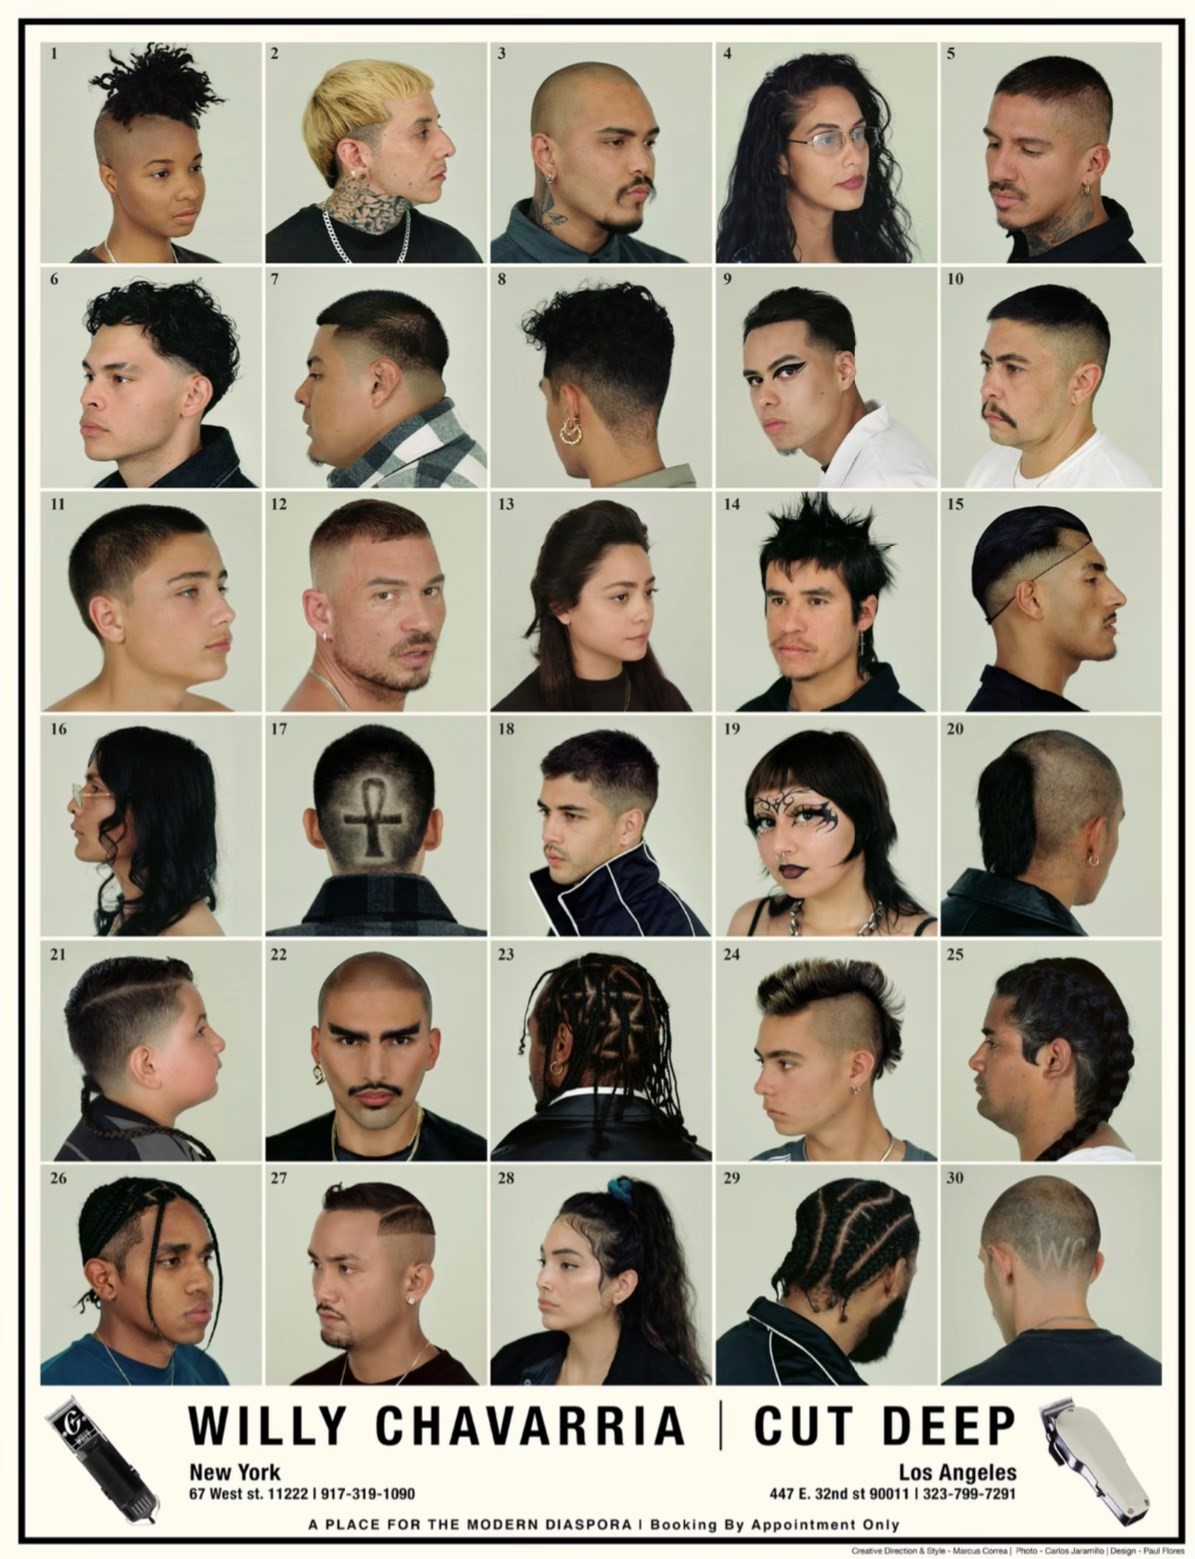 Celebrating Latinx power through the lens of the classic barbershop | Dazed